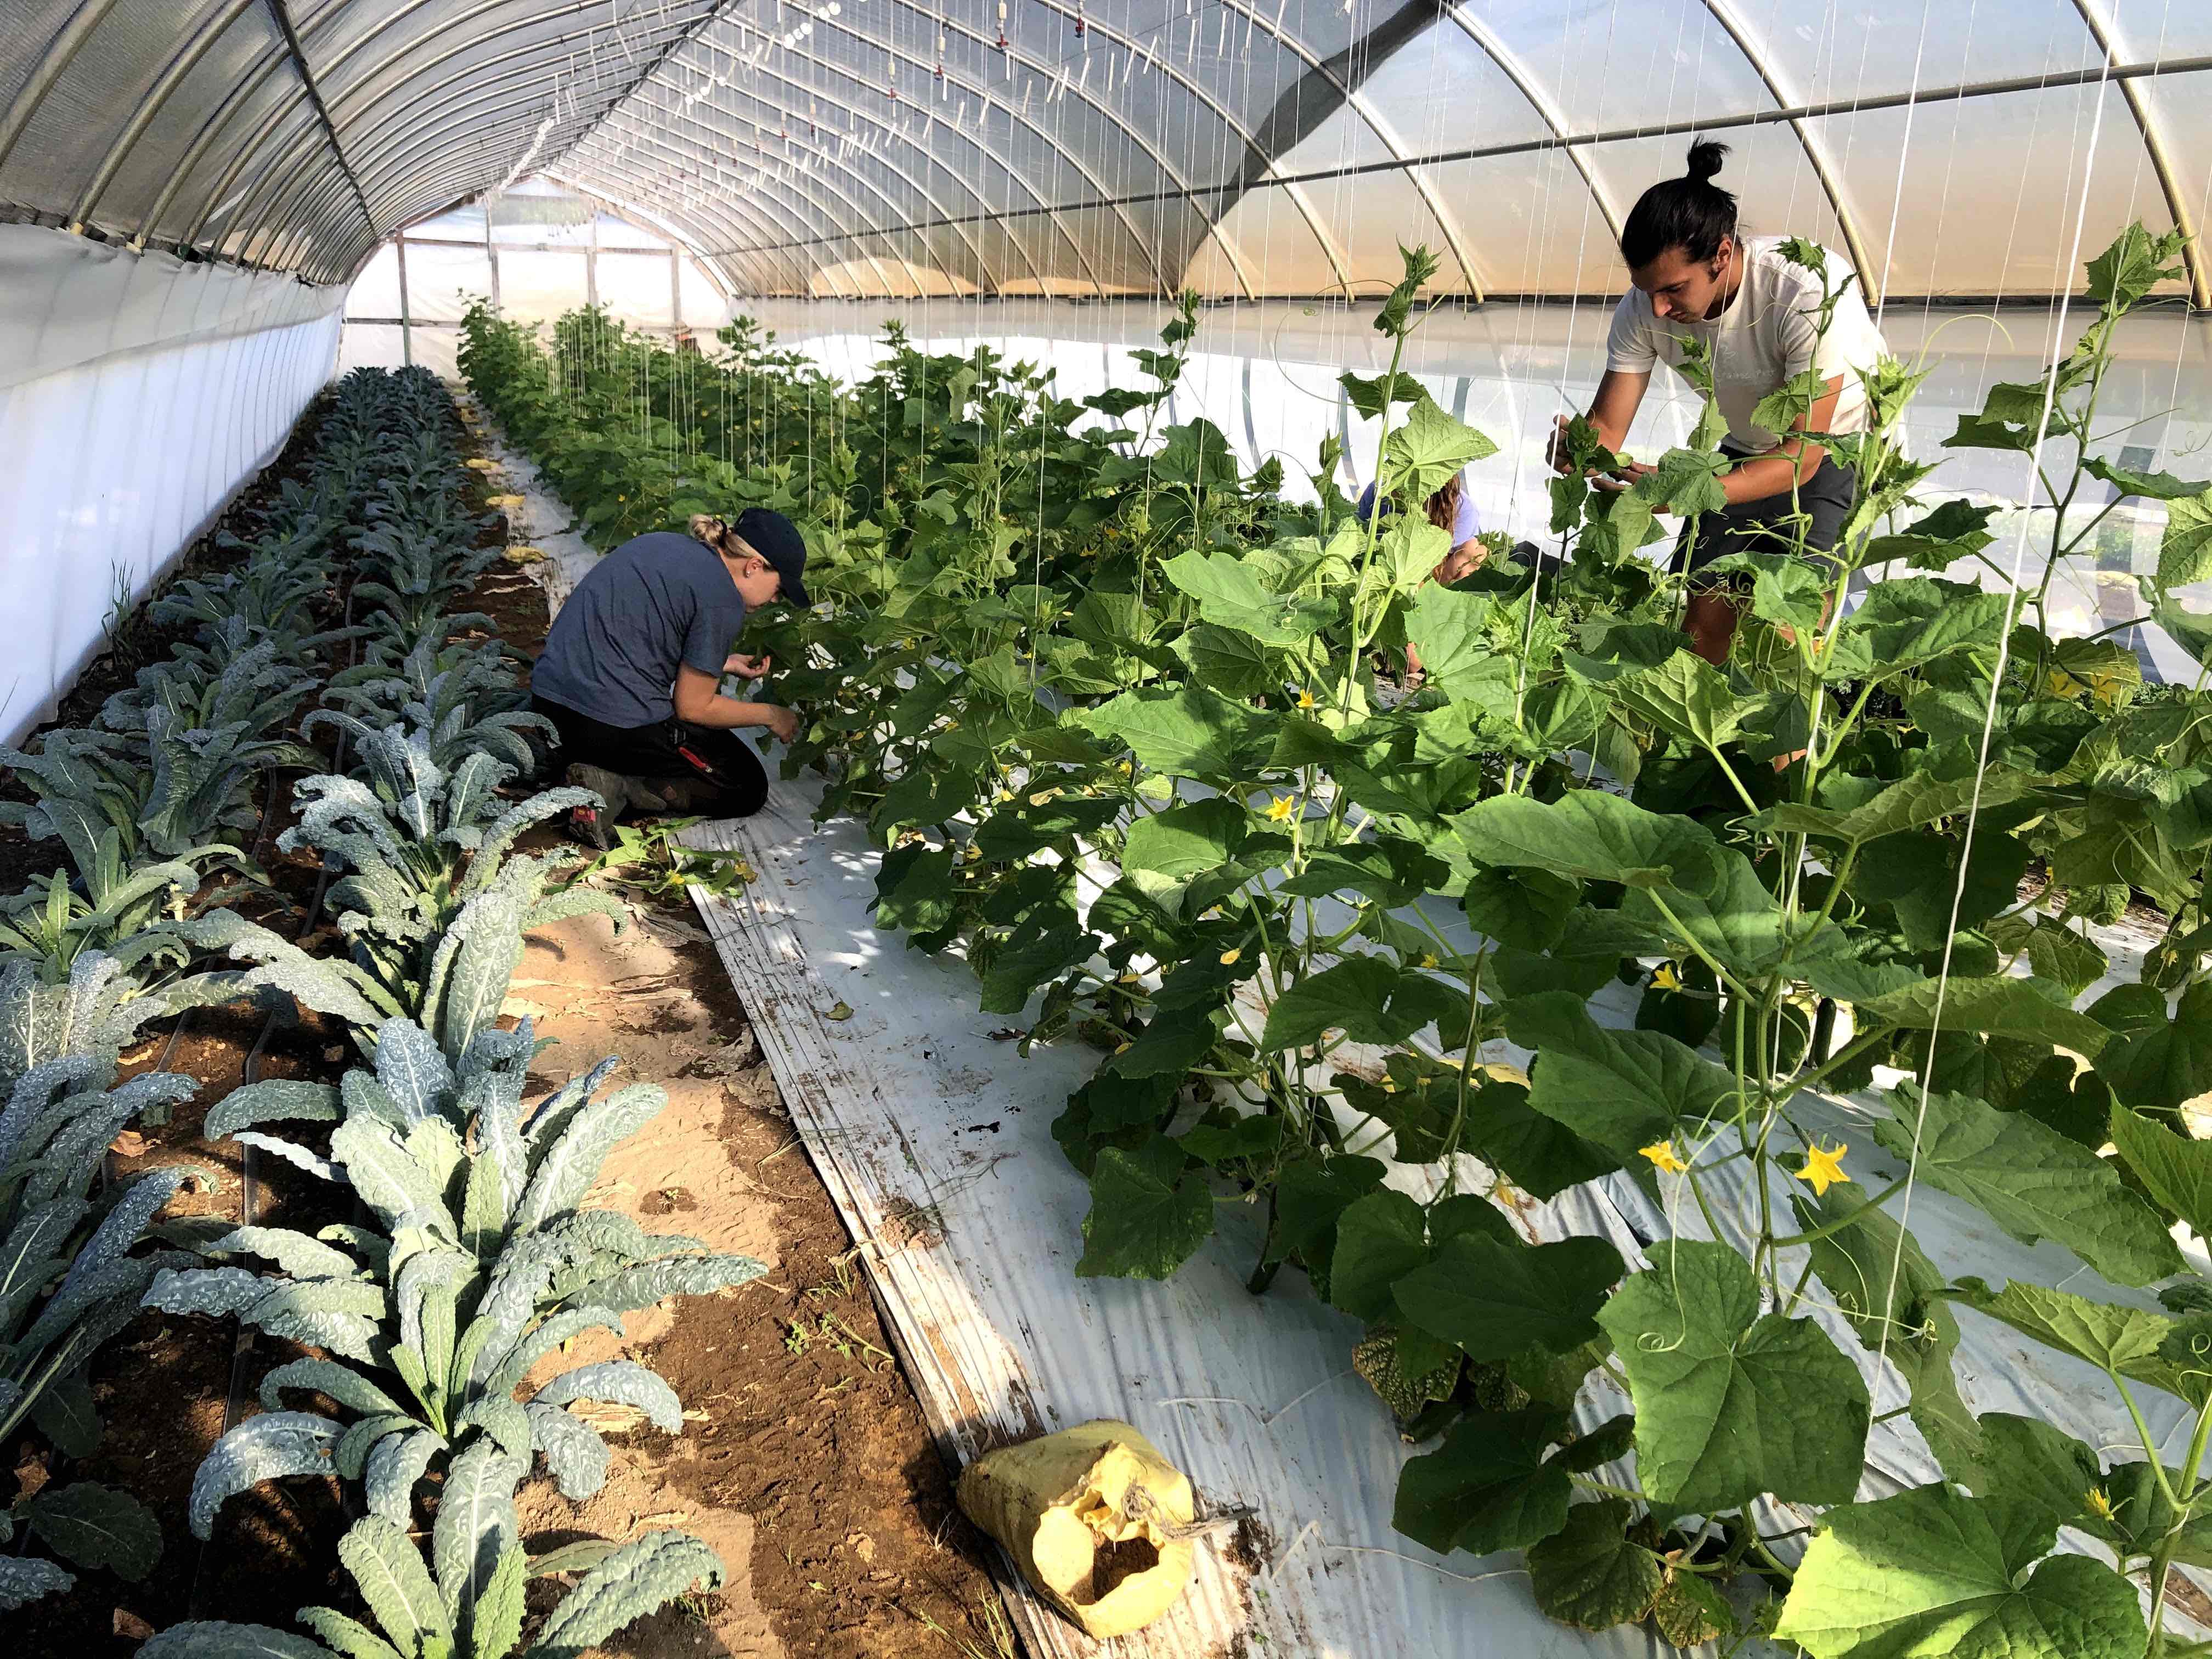 Students tend to beans inside a greenhouse at the MSU Student Organic Farm